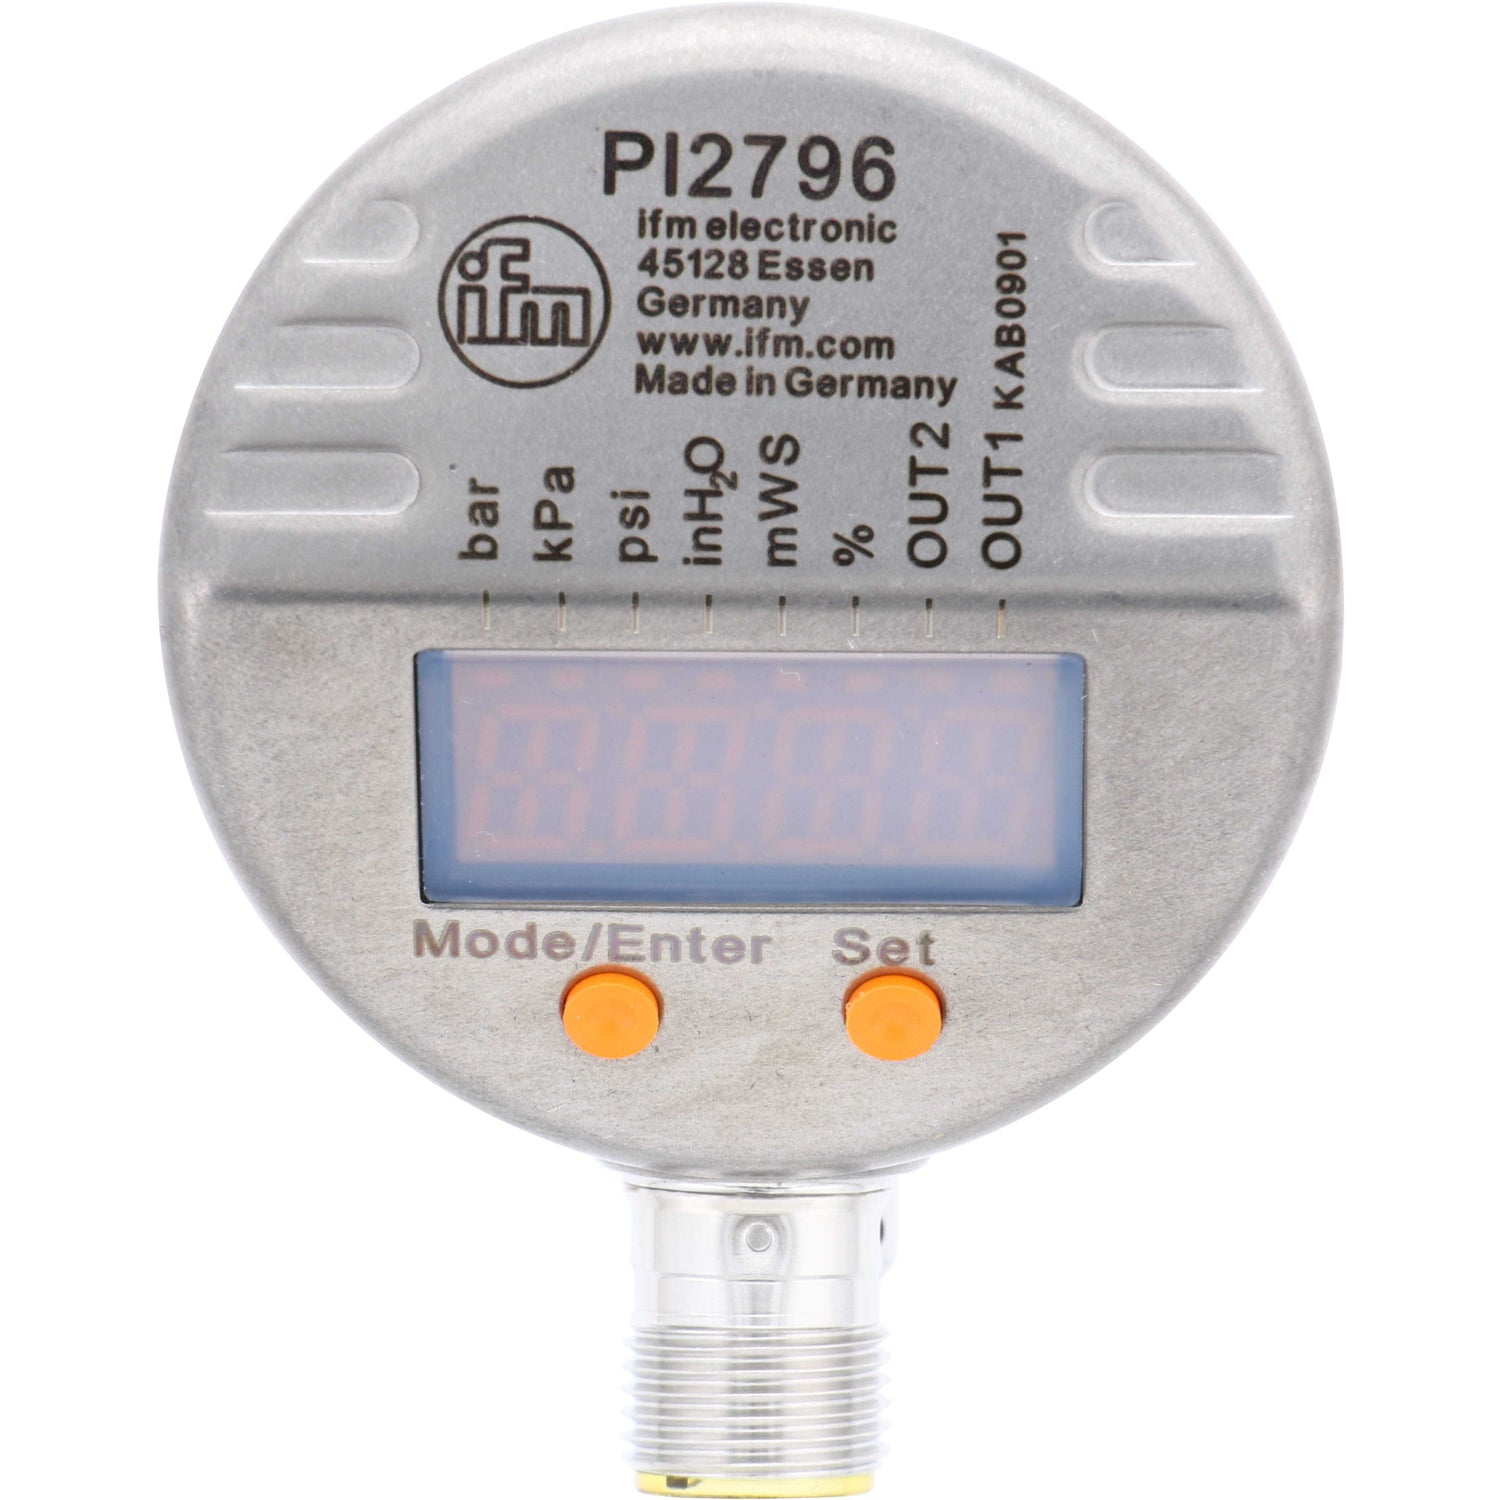 Cylindrical stainless-steel pressure sensor with digital display, two orange push buttons, light text printed on surface. Pressure sensor is shown on white background. PI2796